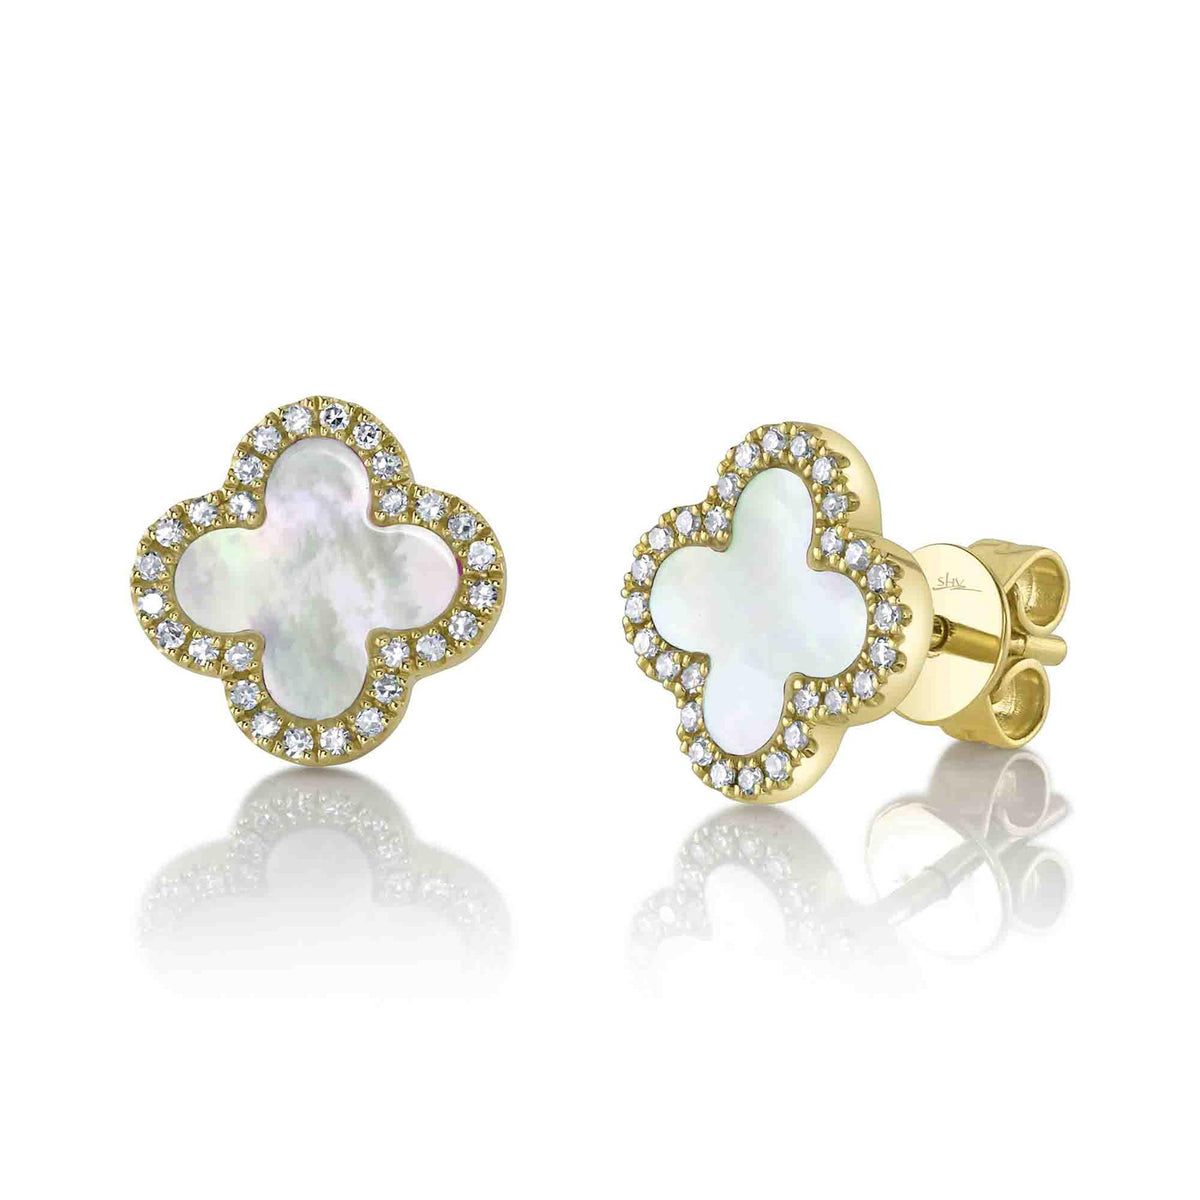 Shy Creation 14K Yellow Gold Clover Earrings with Mother of Pearl and Diamonds Totaling .15 Carats (SI1-H)